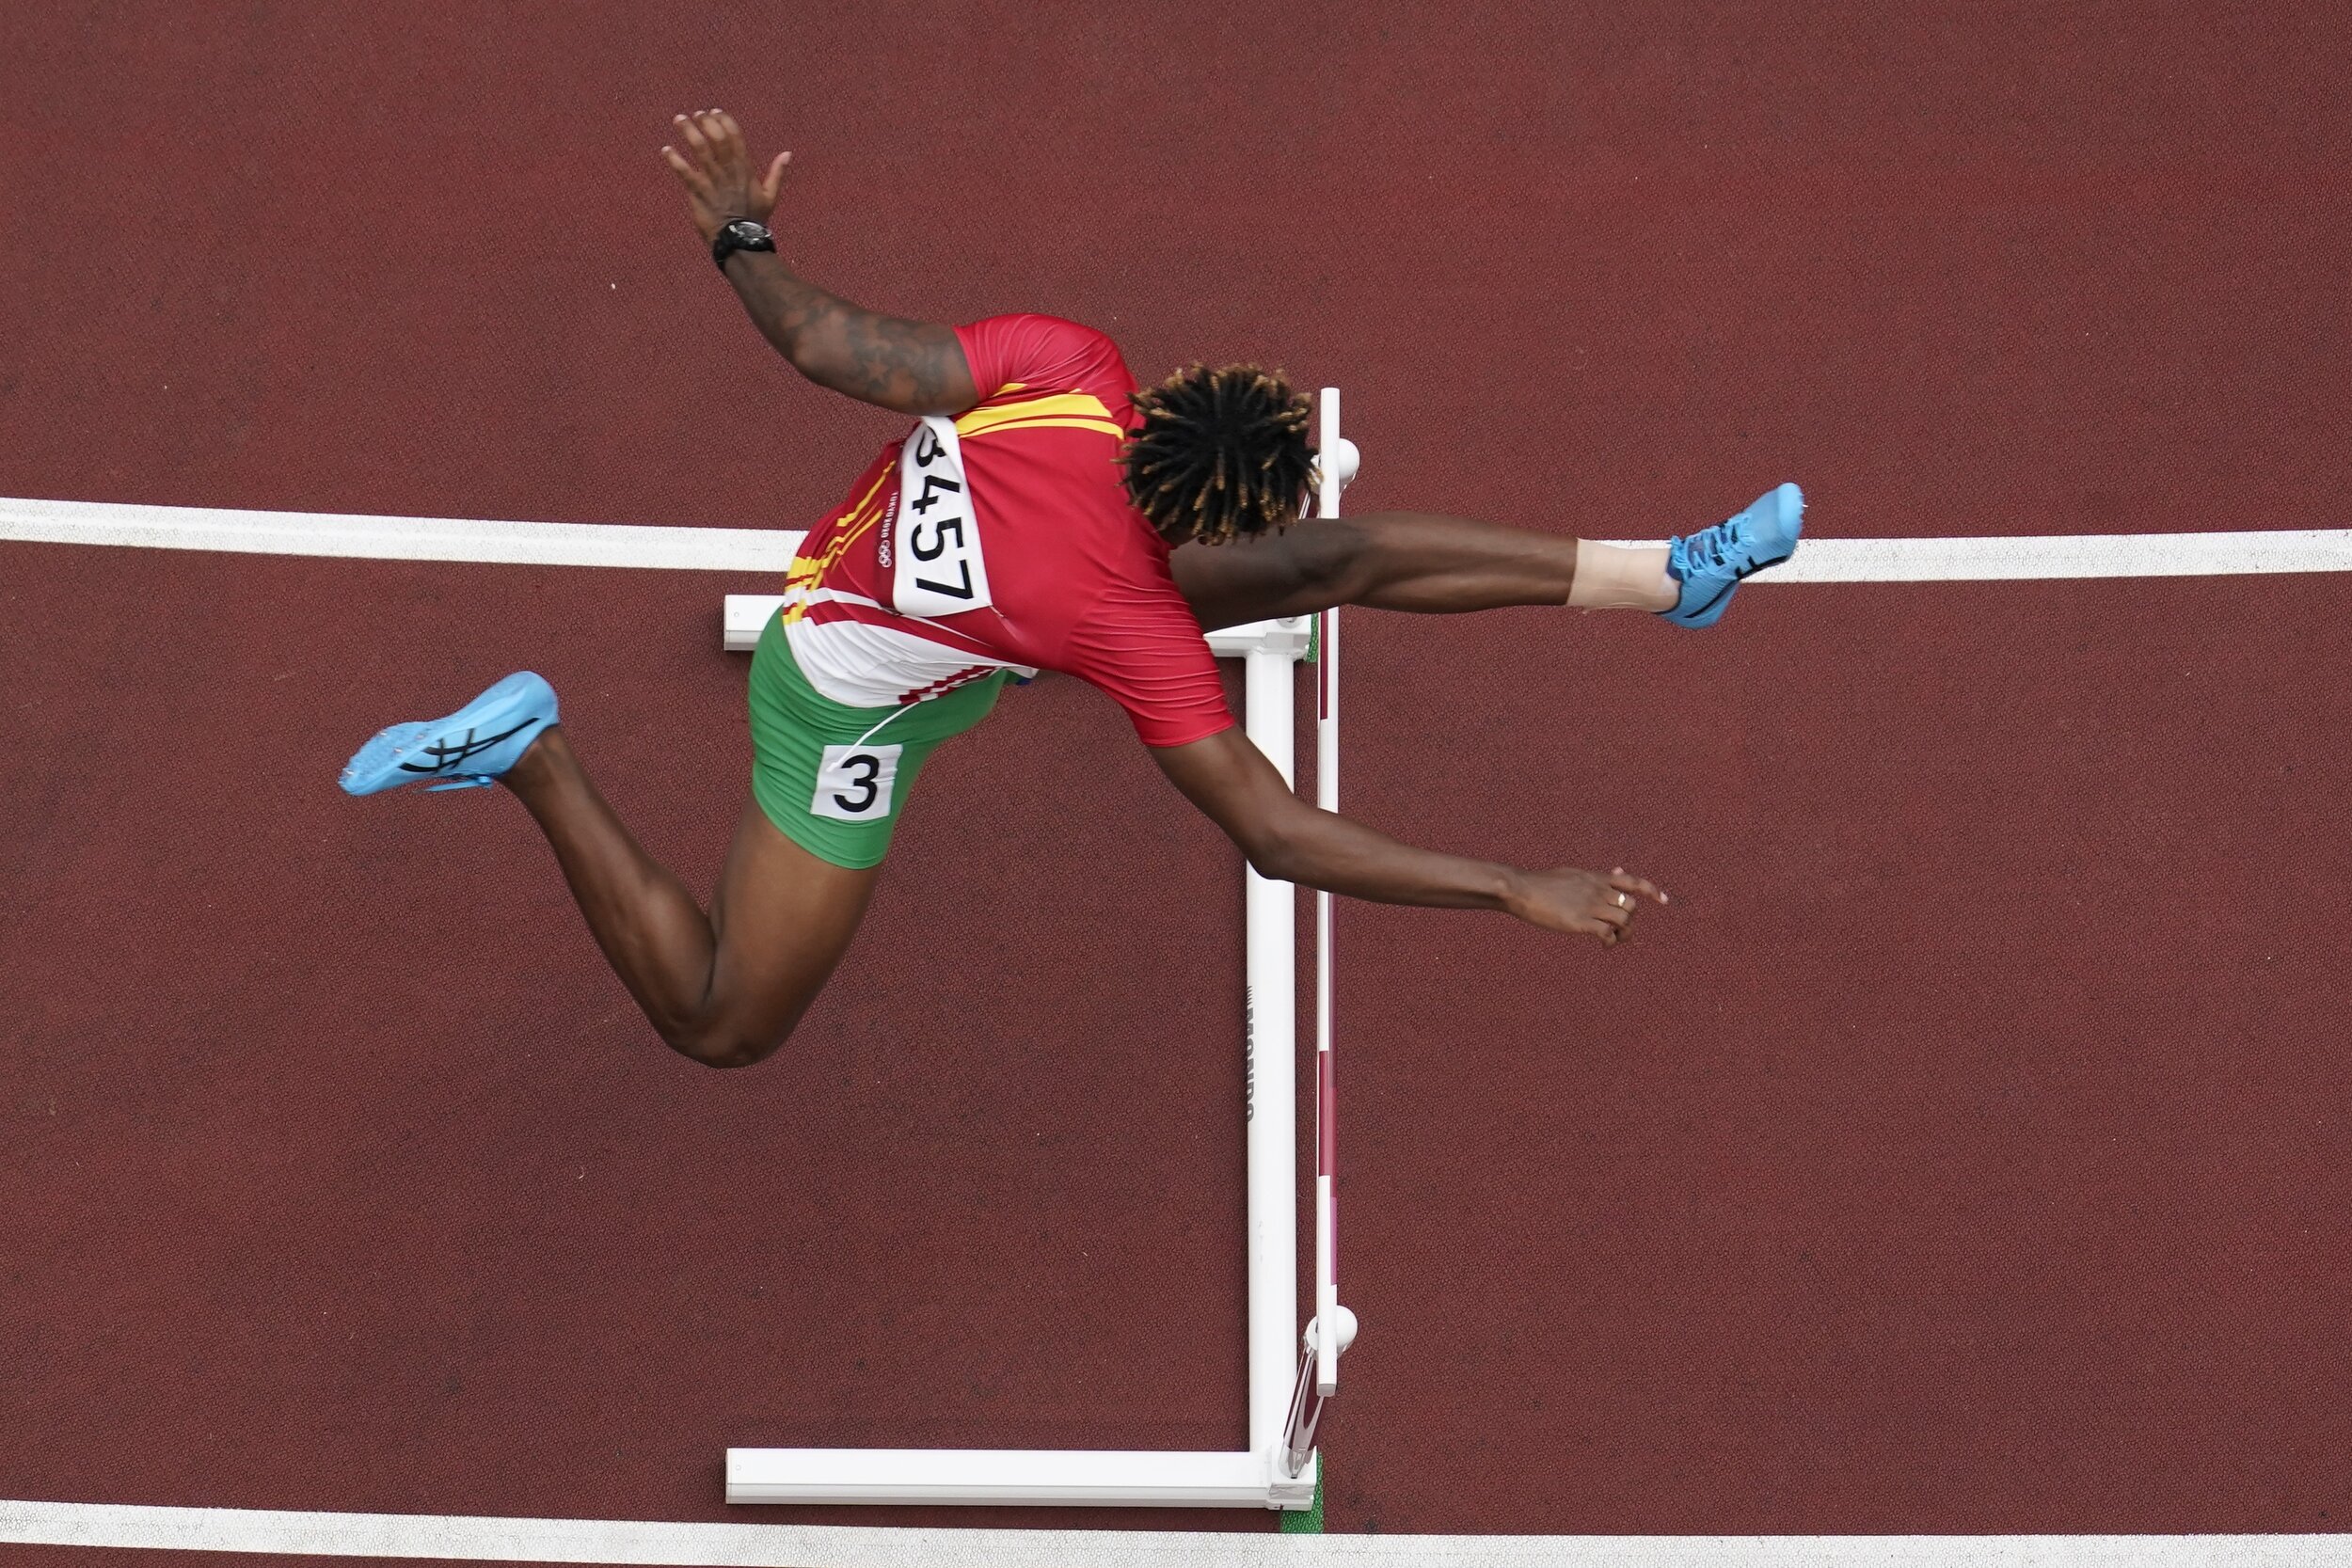  Ned Azemia, of Seychelles, competes during the first round of the men's 400-meter hurdles at the 2020 Summer Olympics, Friday, July 30, 2021, in Tokyo. (AP Photo/Morry Gash) 